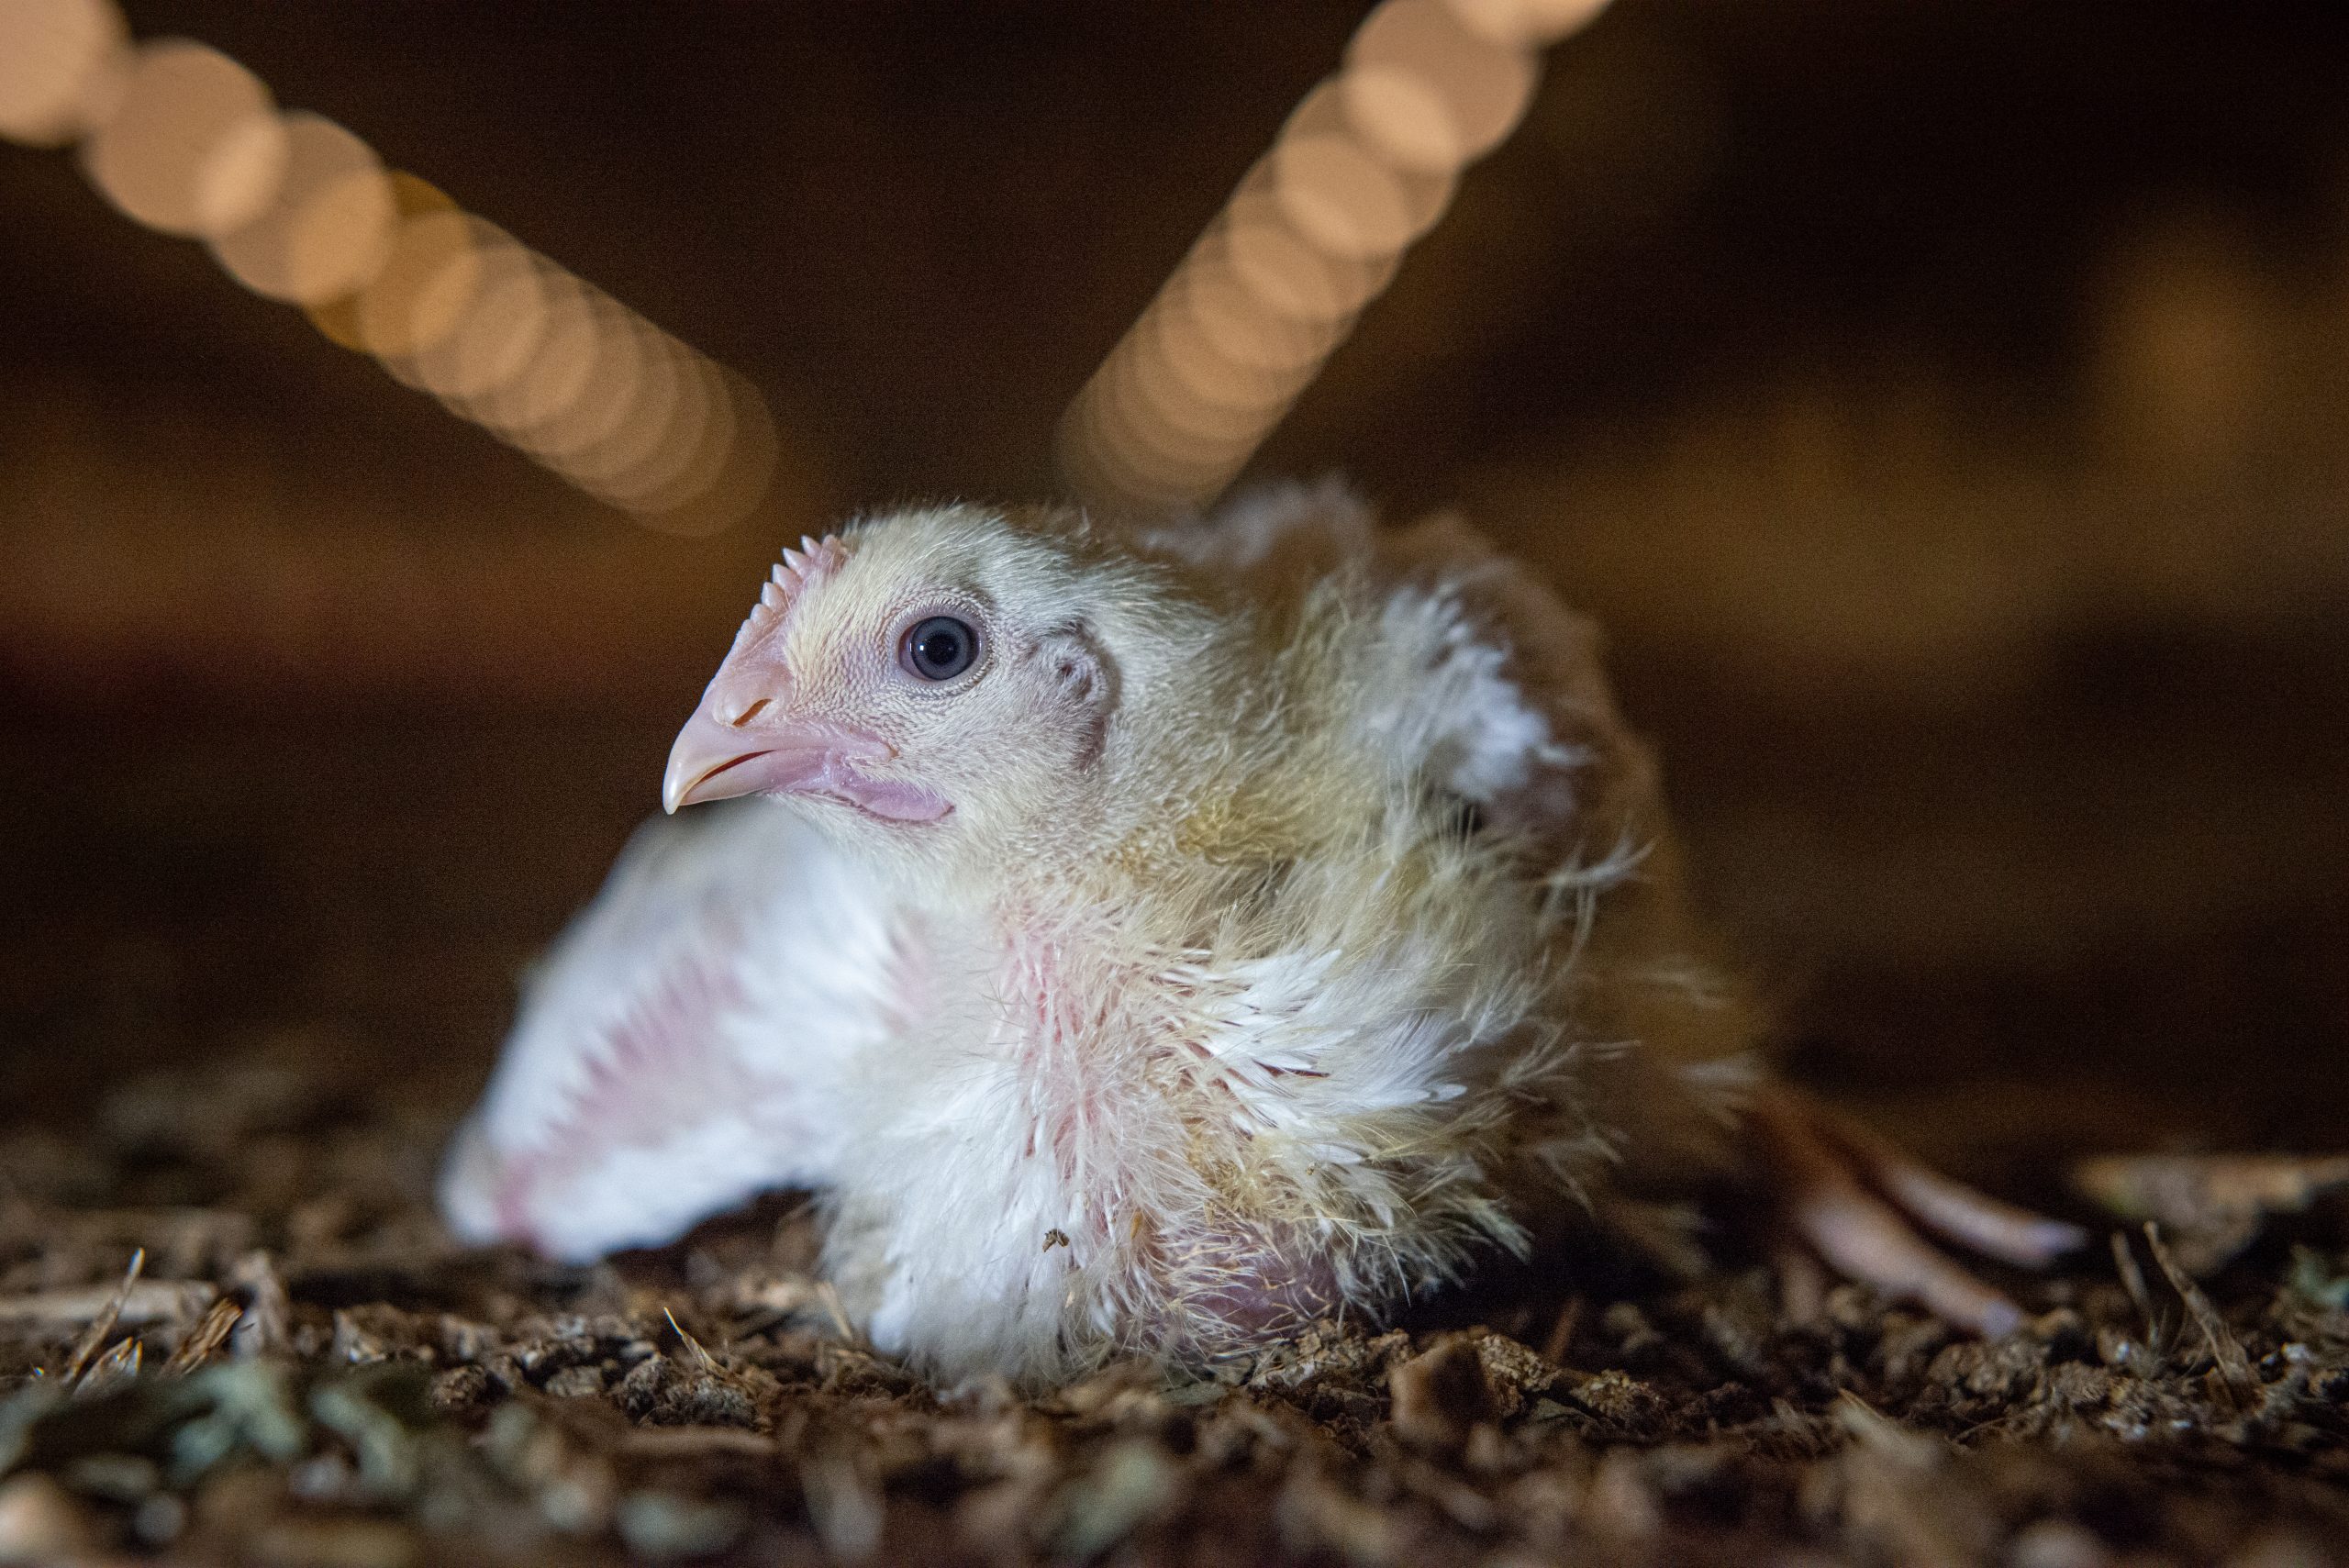 A young broiler chicken in a factory farm.